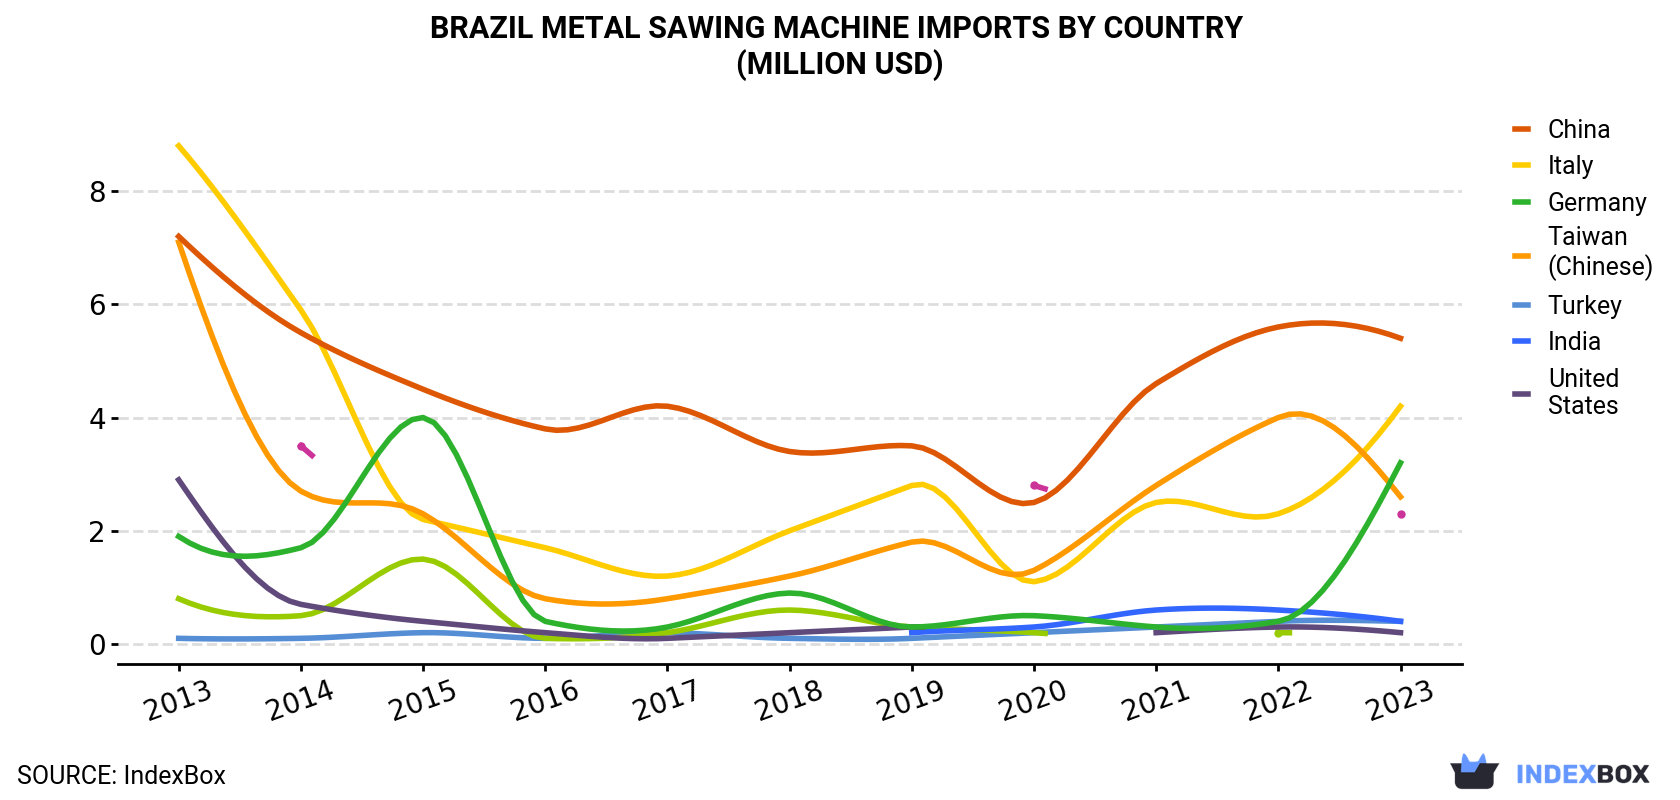 Brazil Metal Sawing Machine Imports By Country (Million USD)